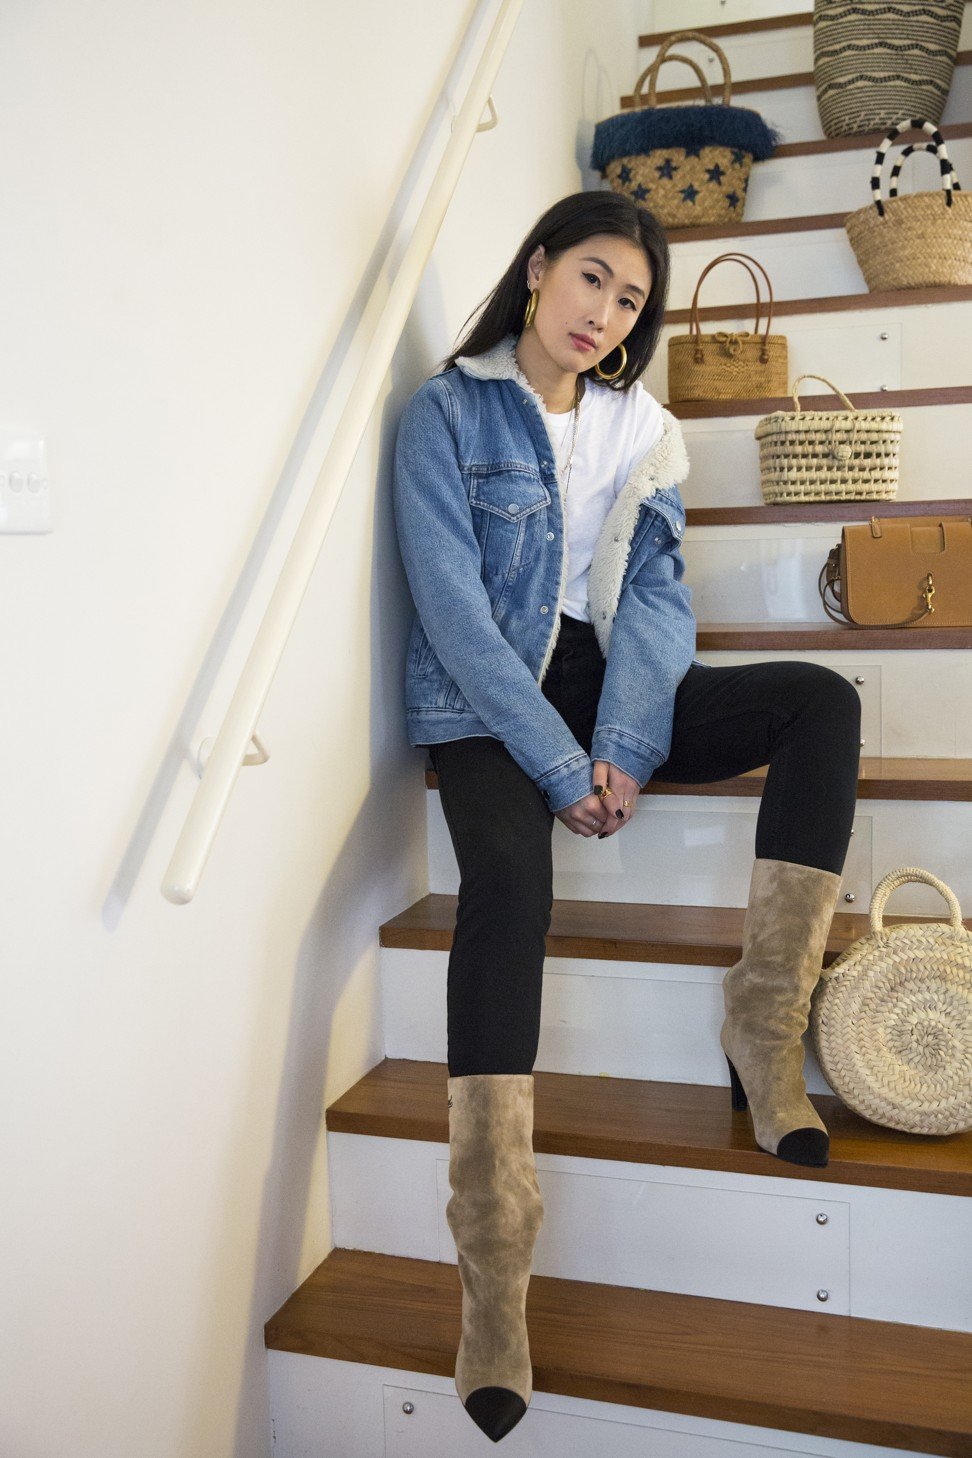 Jacket by Sandro, boots by Chanel, jeans by Frame Denim, T-shirt by ReDone. Photo: Michelle Wong